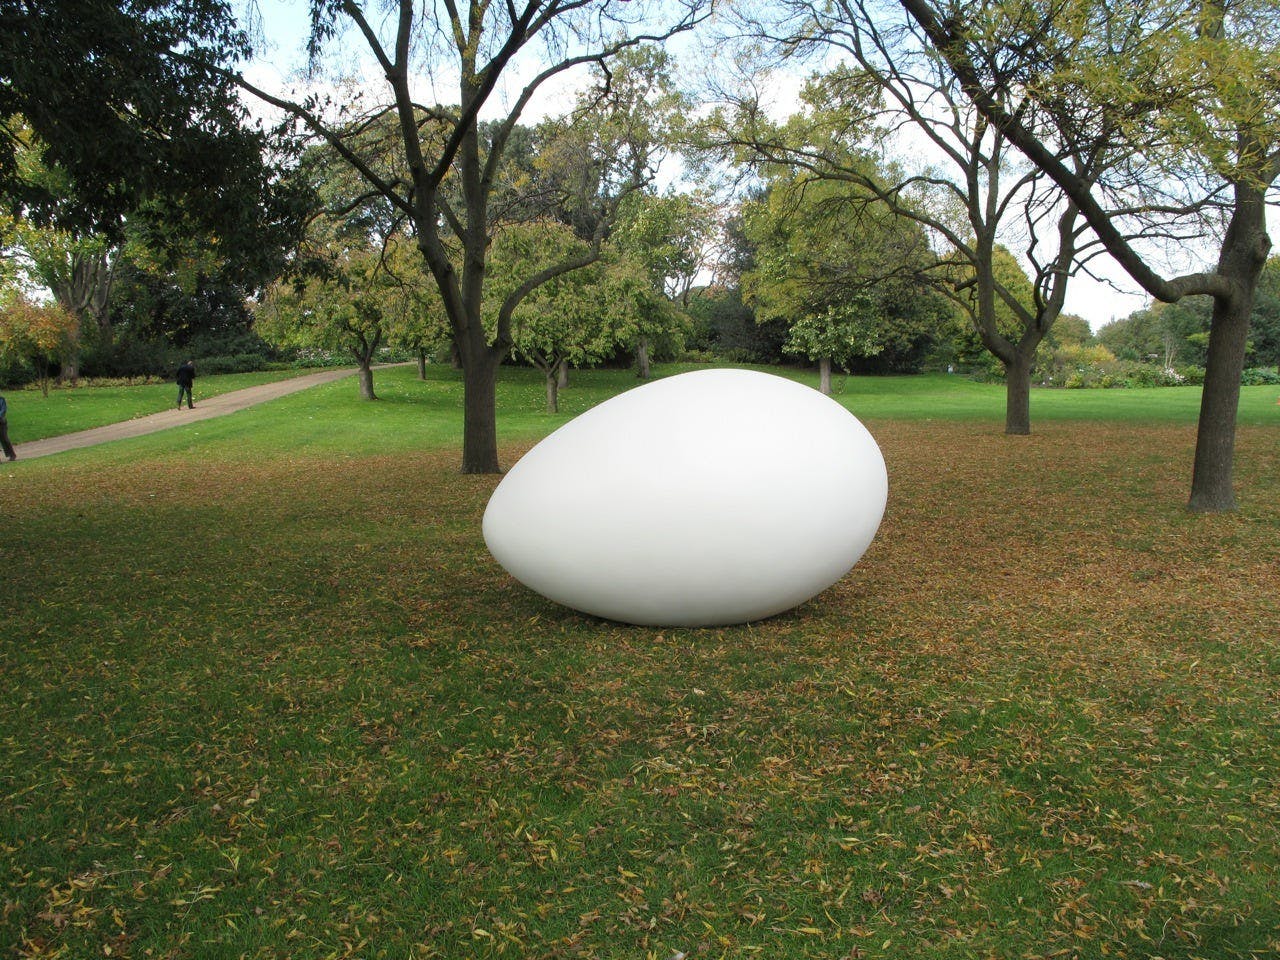 Oeuvre by Gavin Turk, 2010. [A large egg sculpture sits on a field in what looks like a public park.]